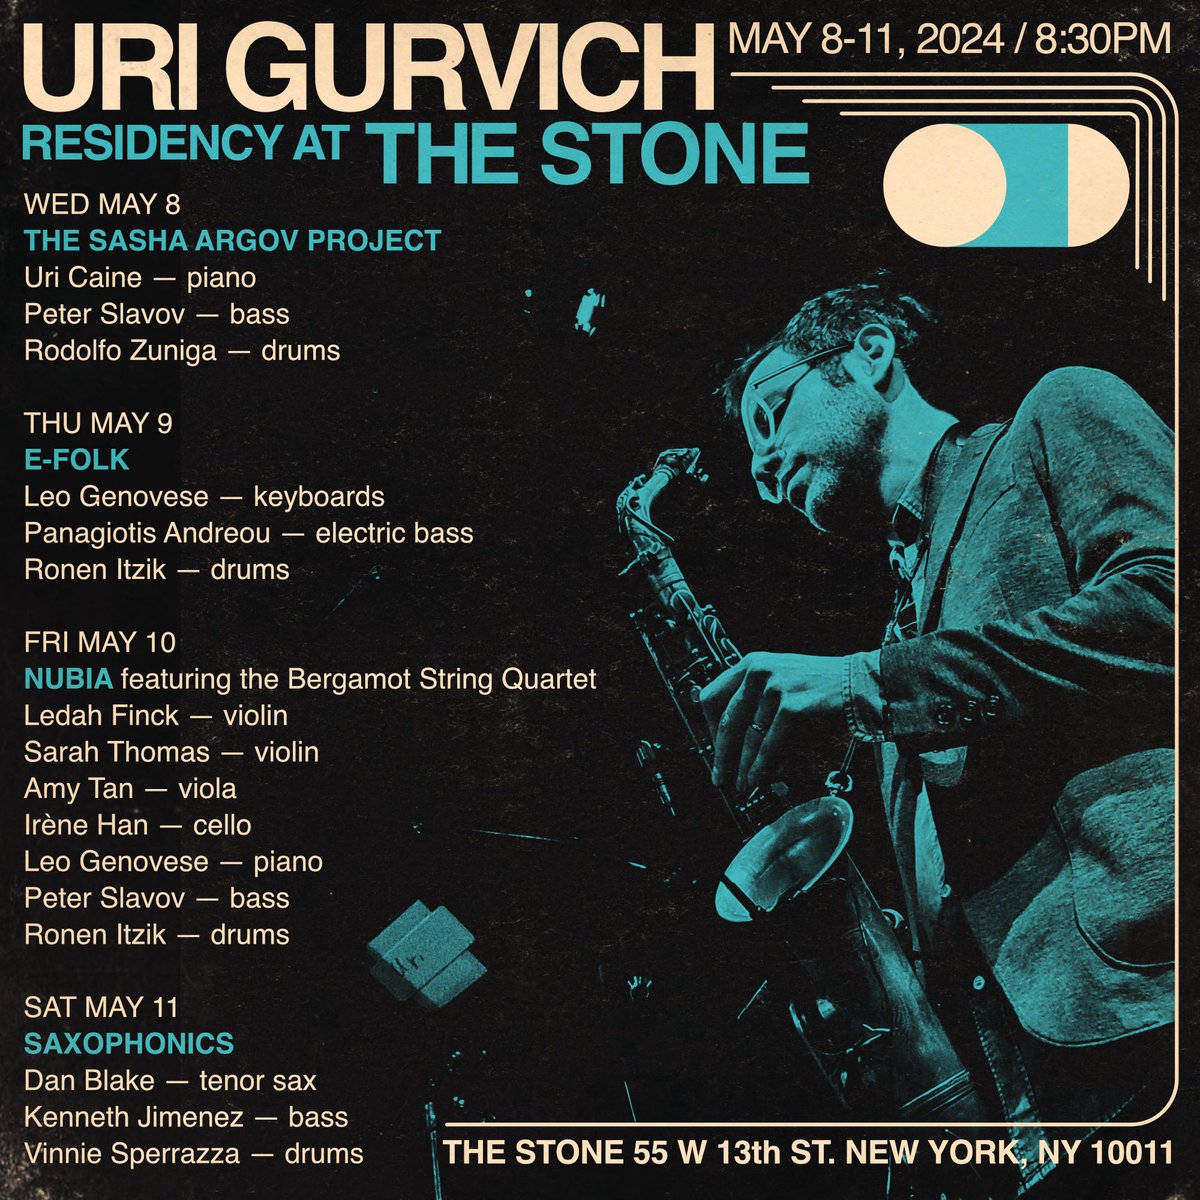 Excited to be back at The Stone, NYC, for four nights, May 8th-11th, w/ many old and new friends, 8:30p set each night, Tix at the door, hope to see you there! 🙏